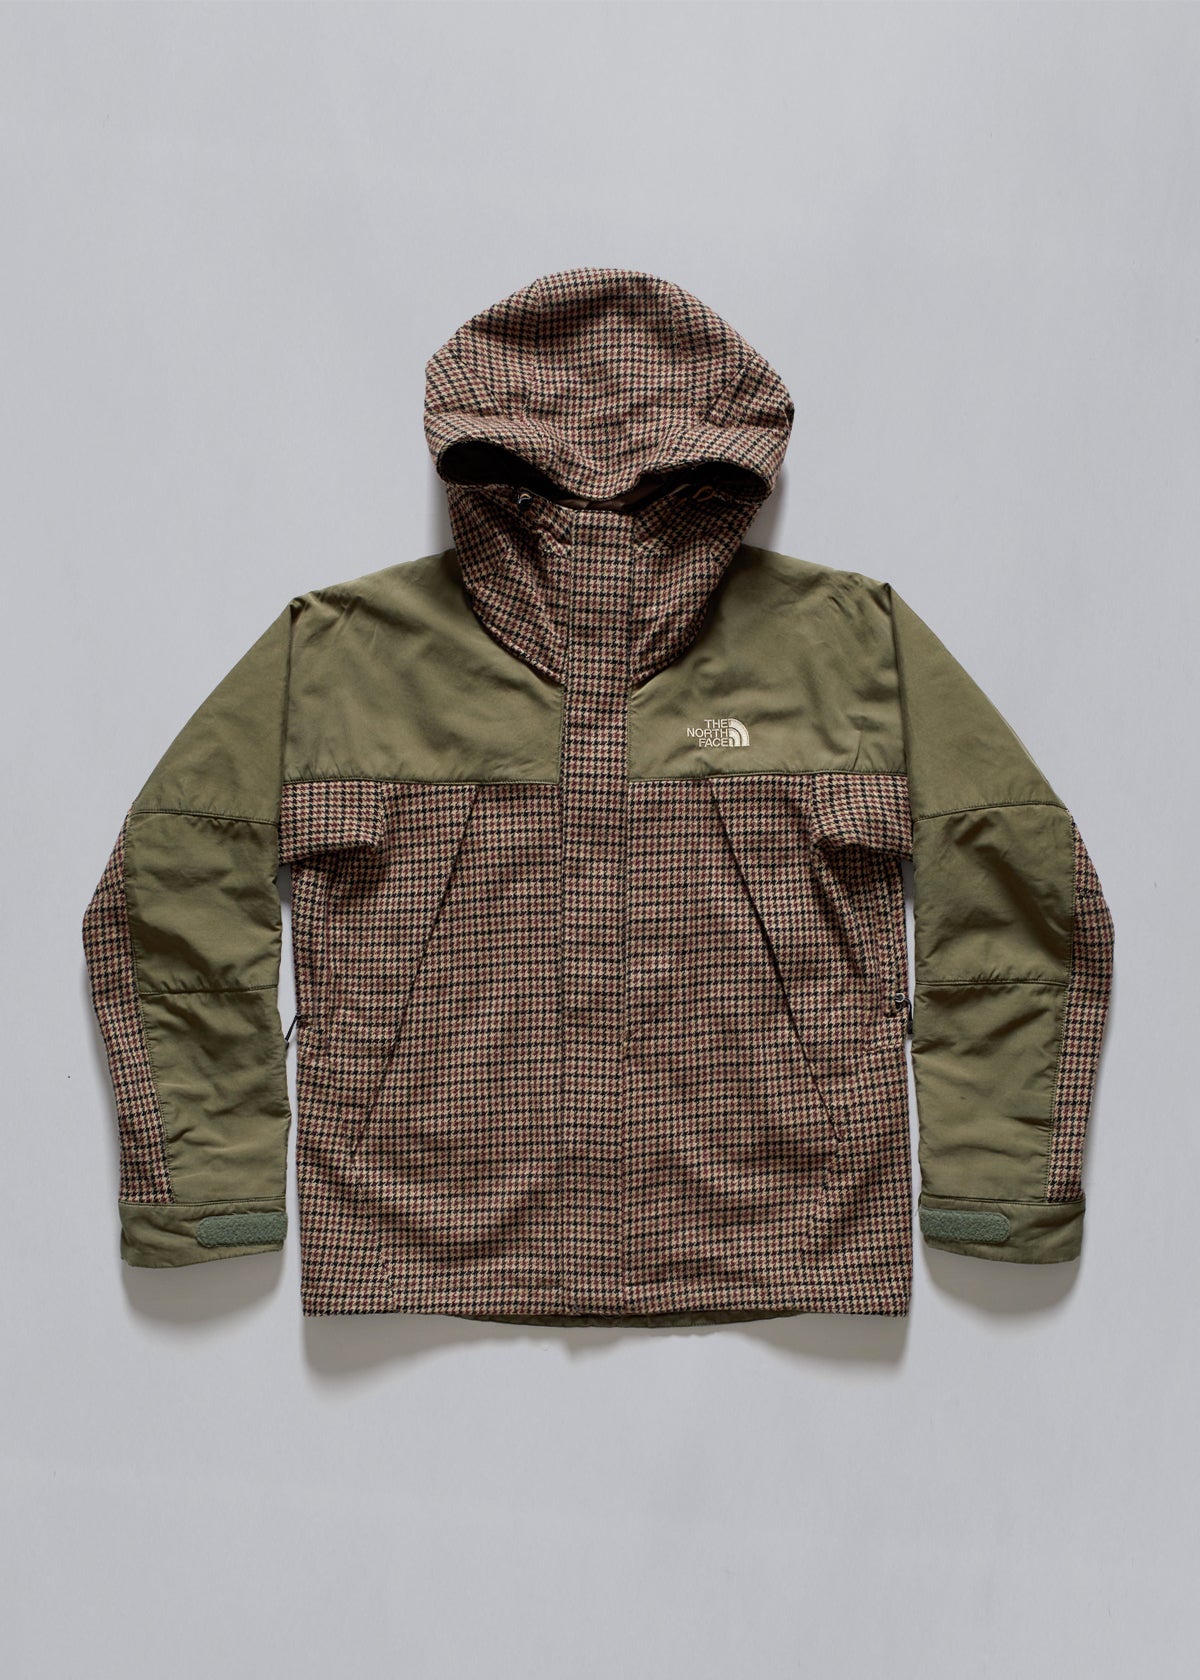 Houndstooth Tweed Mountain Jacket AW2012 - Large - The Archivist Store